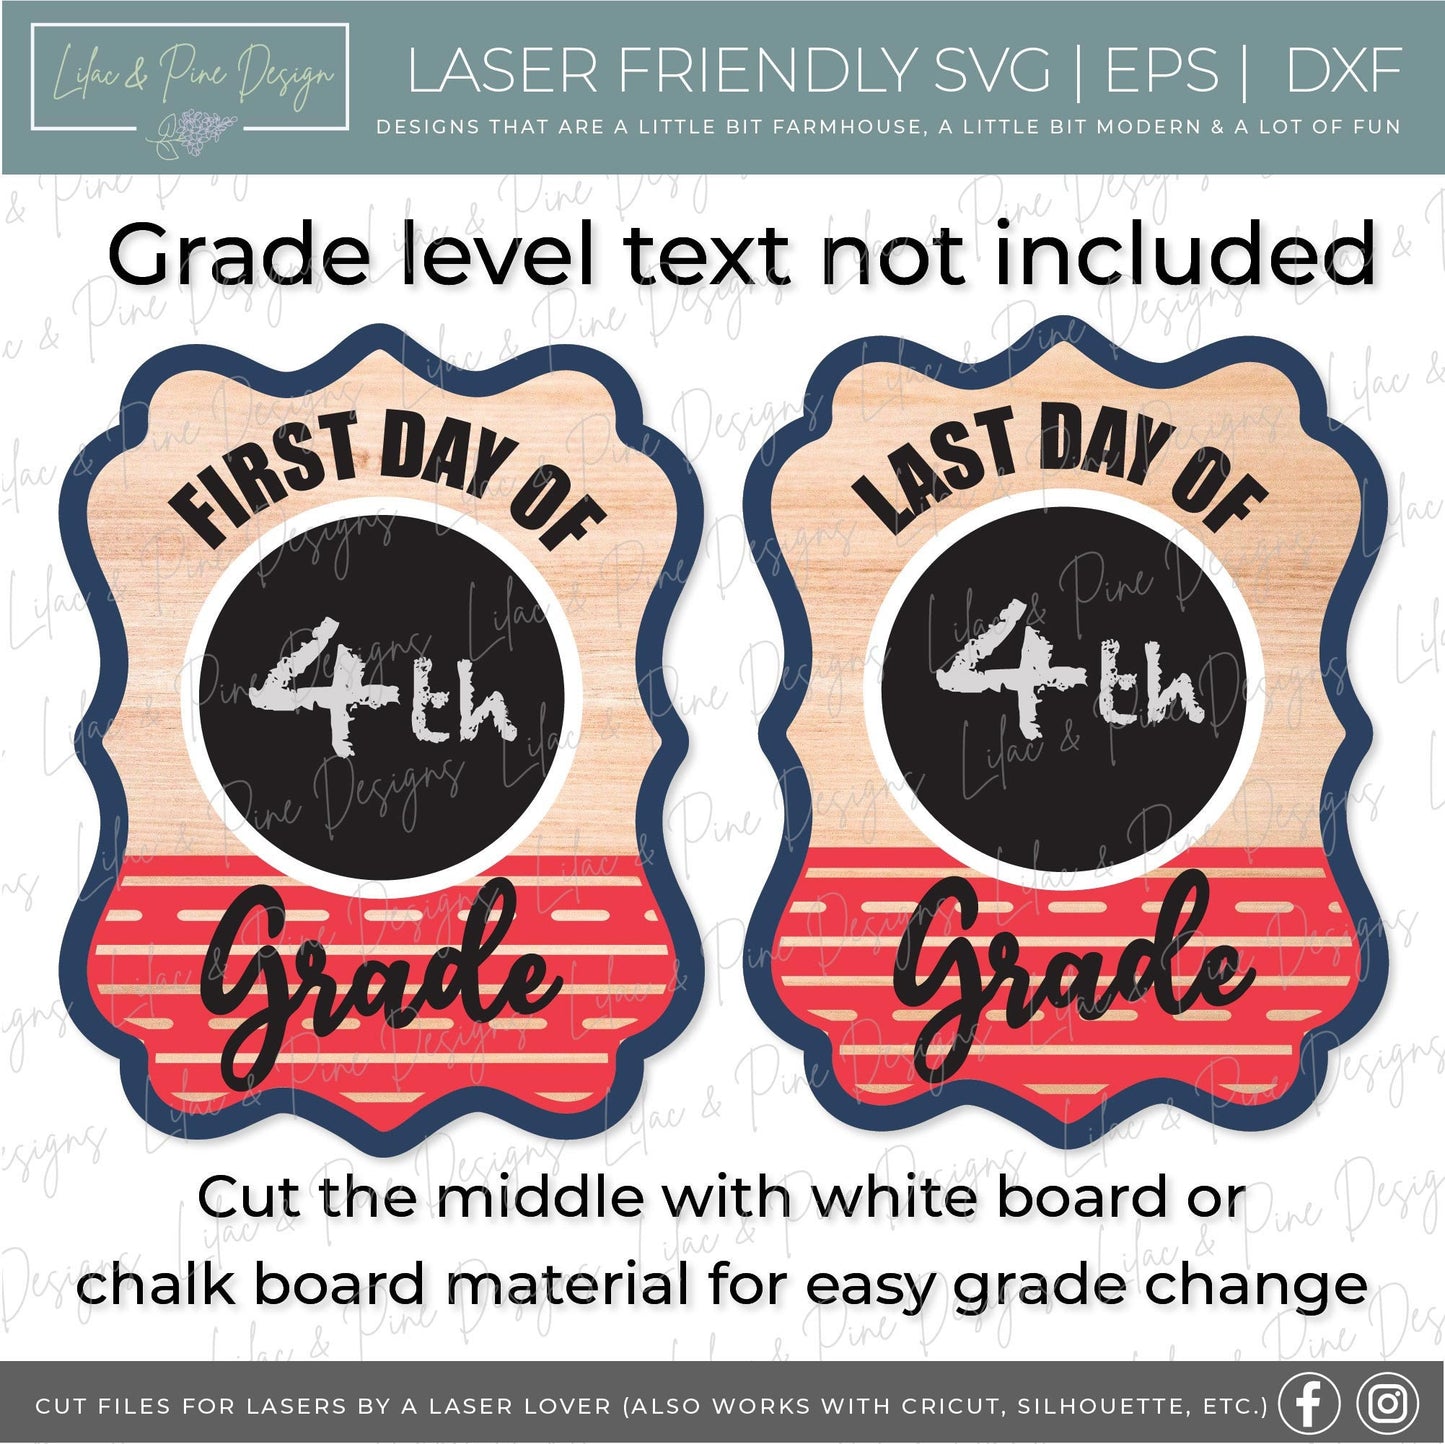 Reversible back to school sign SVG, first day of school svg, last day of school SVG, Grade level school sign, Glowforge SVG, laser cut file